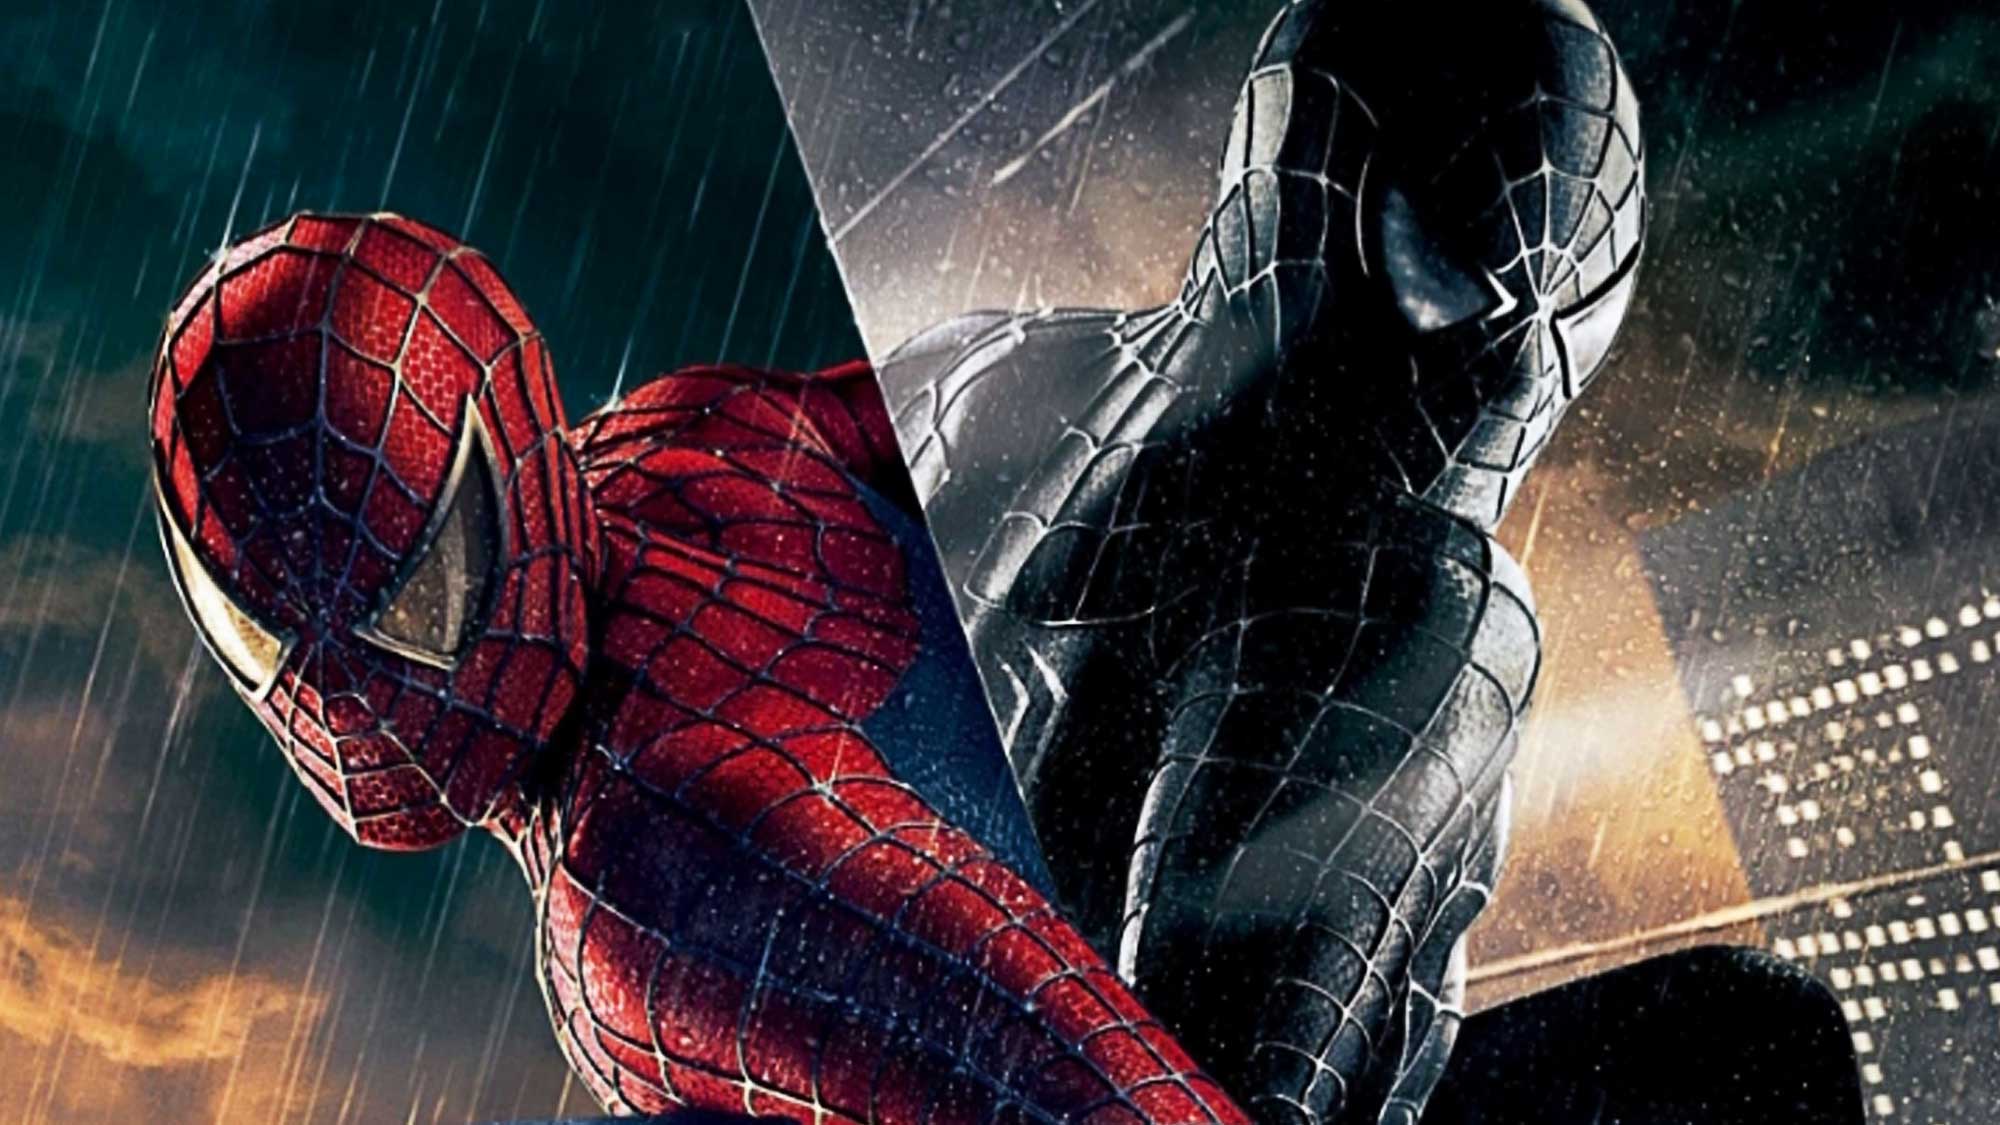 Spider-Man 3 Box Office Breaks Records With A $148 Million Weekend (2007)